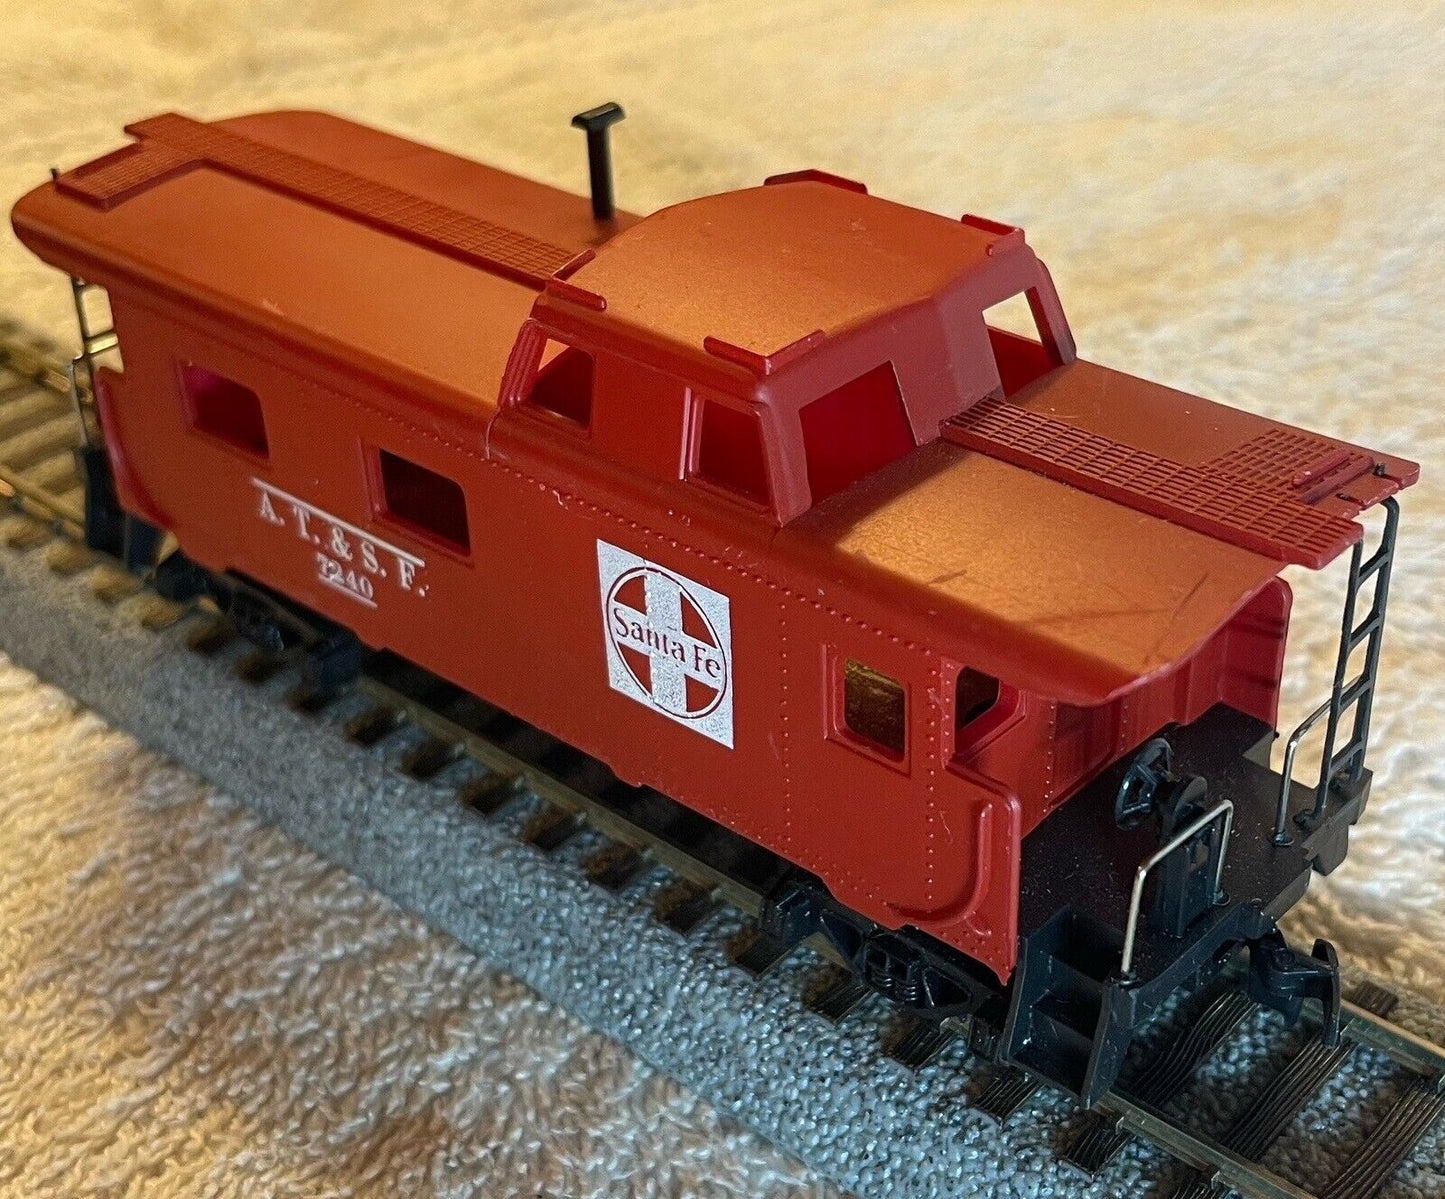 HO Scale TYCO ATSF Caboose #7240 C-7 Excellent Condition